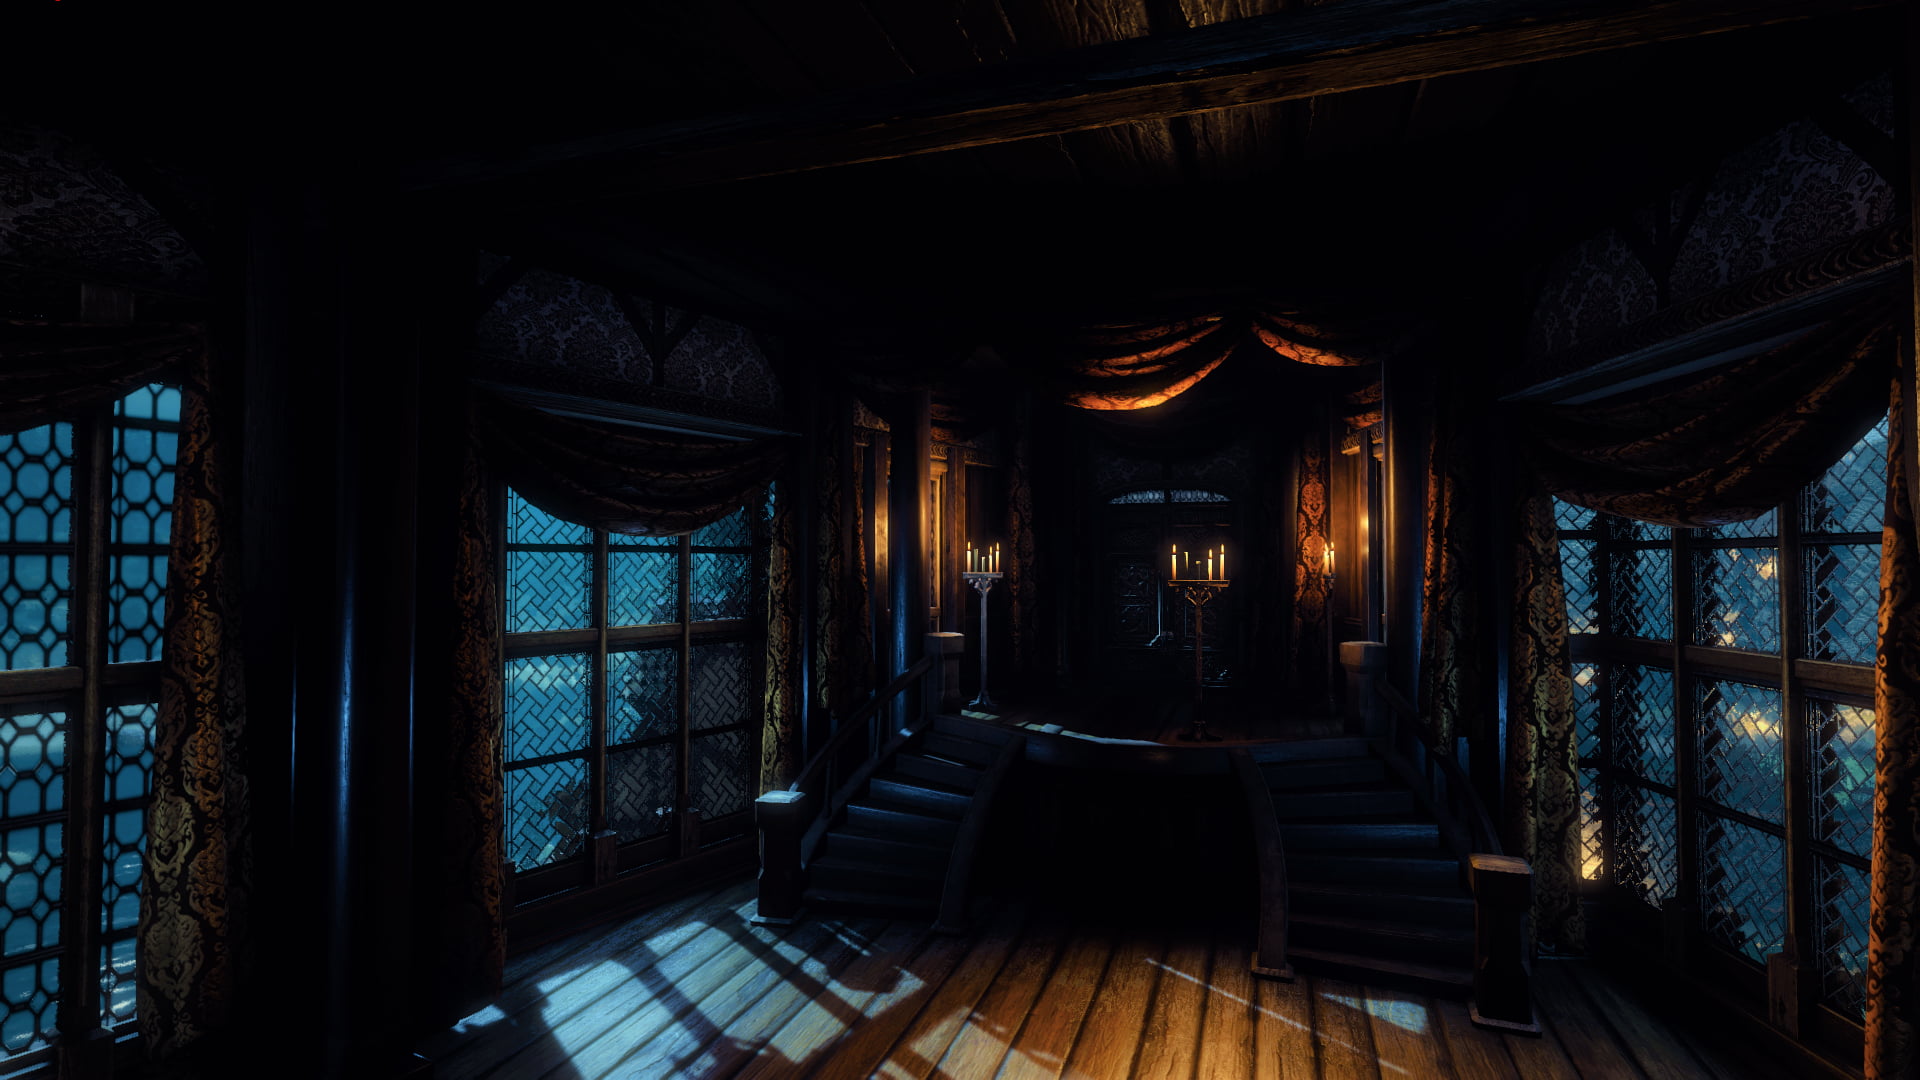 brown curtains, The Witcher 3: Wild Hunt, The Witcher, night, house